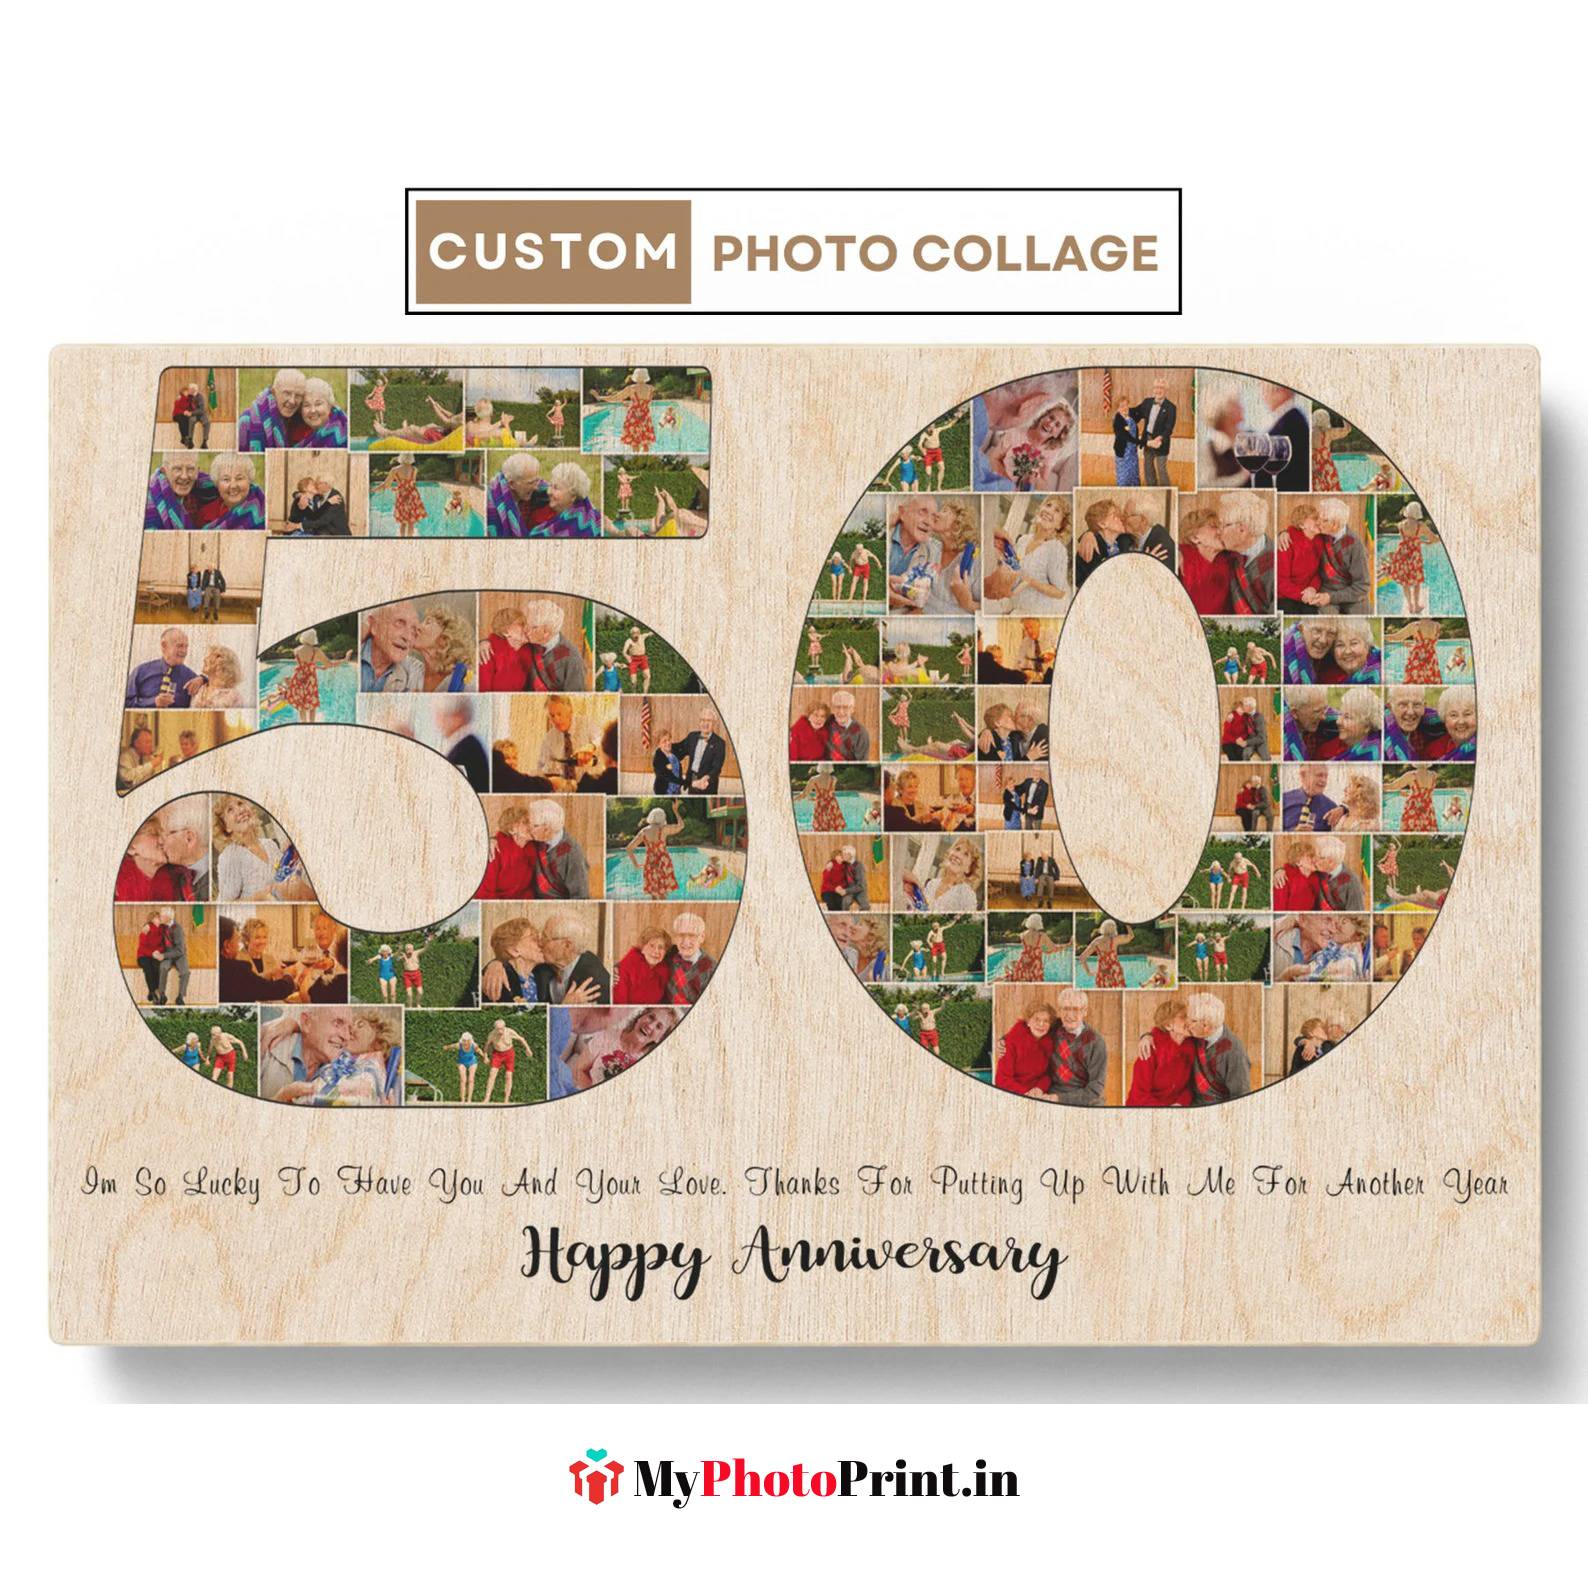 Best 1st Wedding Anniversary Gifts Ideas: 40 Unique Paper Presents for the  First Year (Includes Gifts for Husband or Wife) | 1st wedding anniversary  gift, Paper wedding anniversary gift, Marriage anniversary gifts